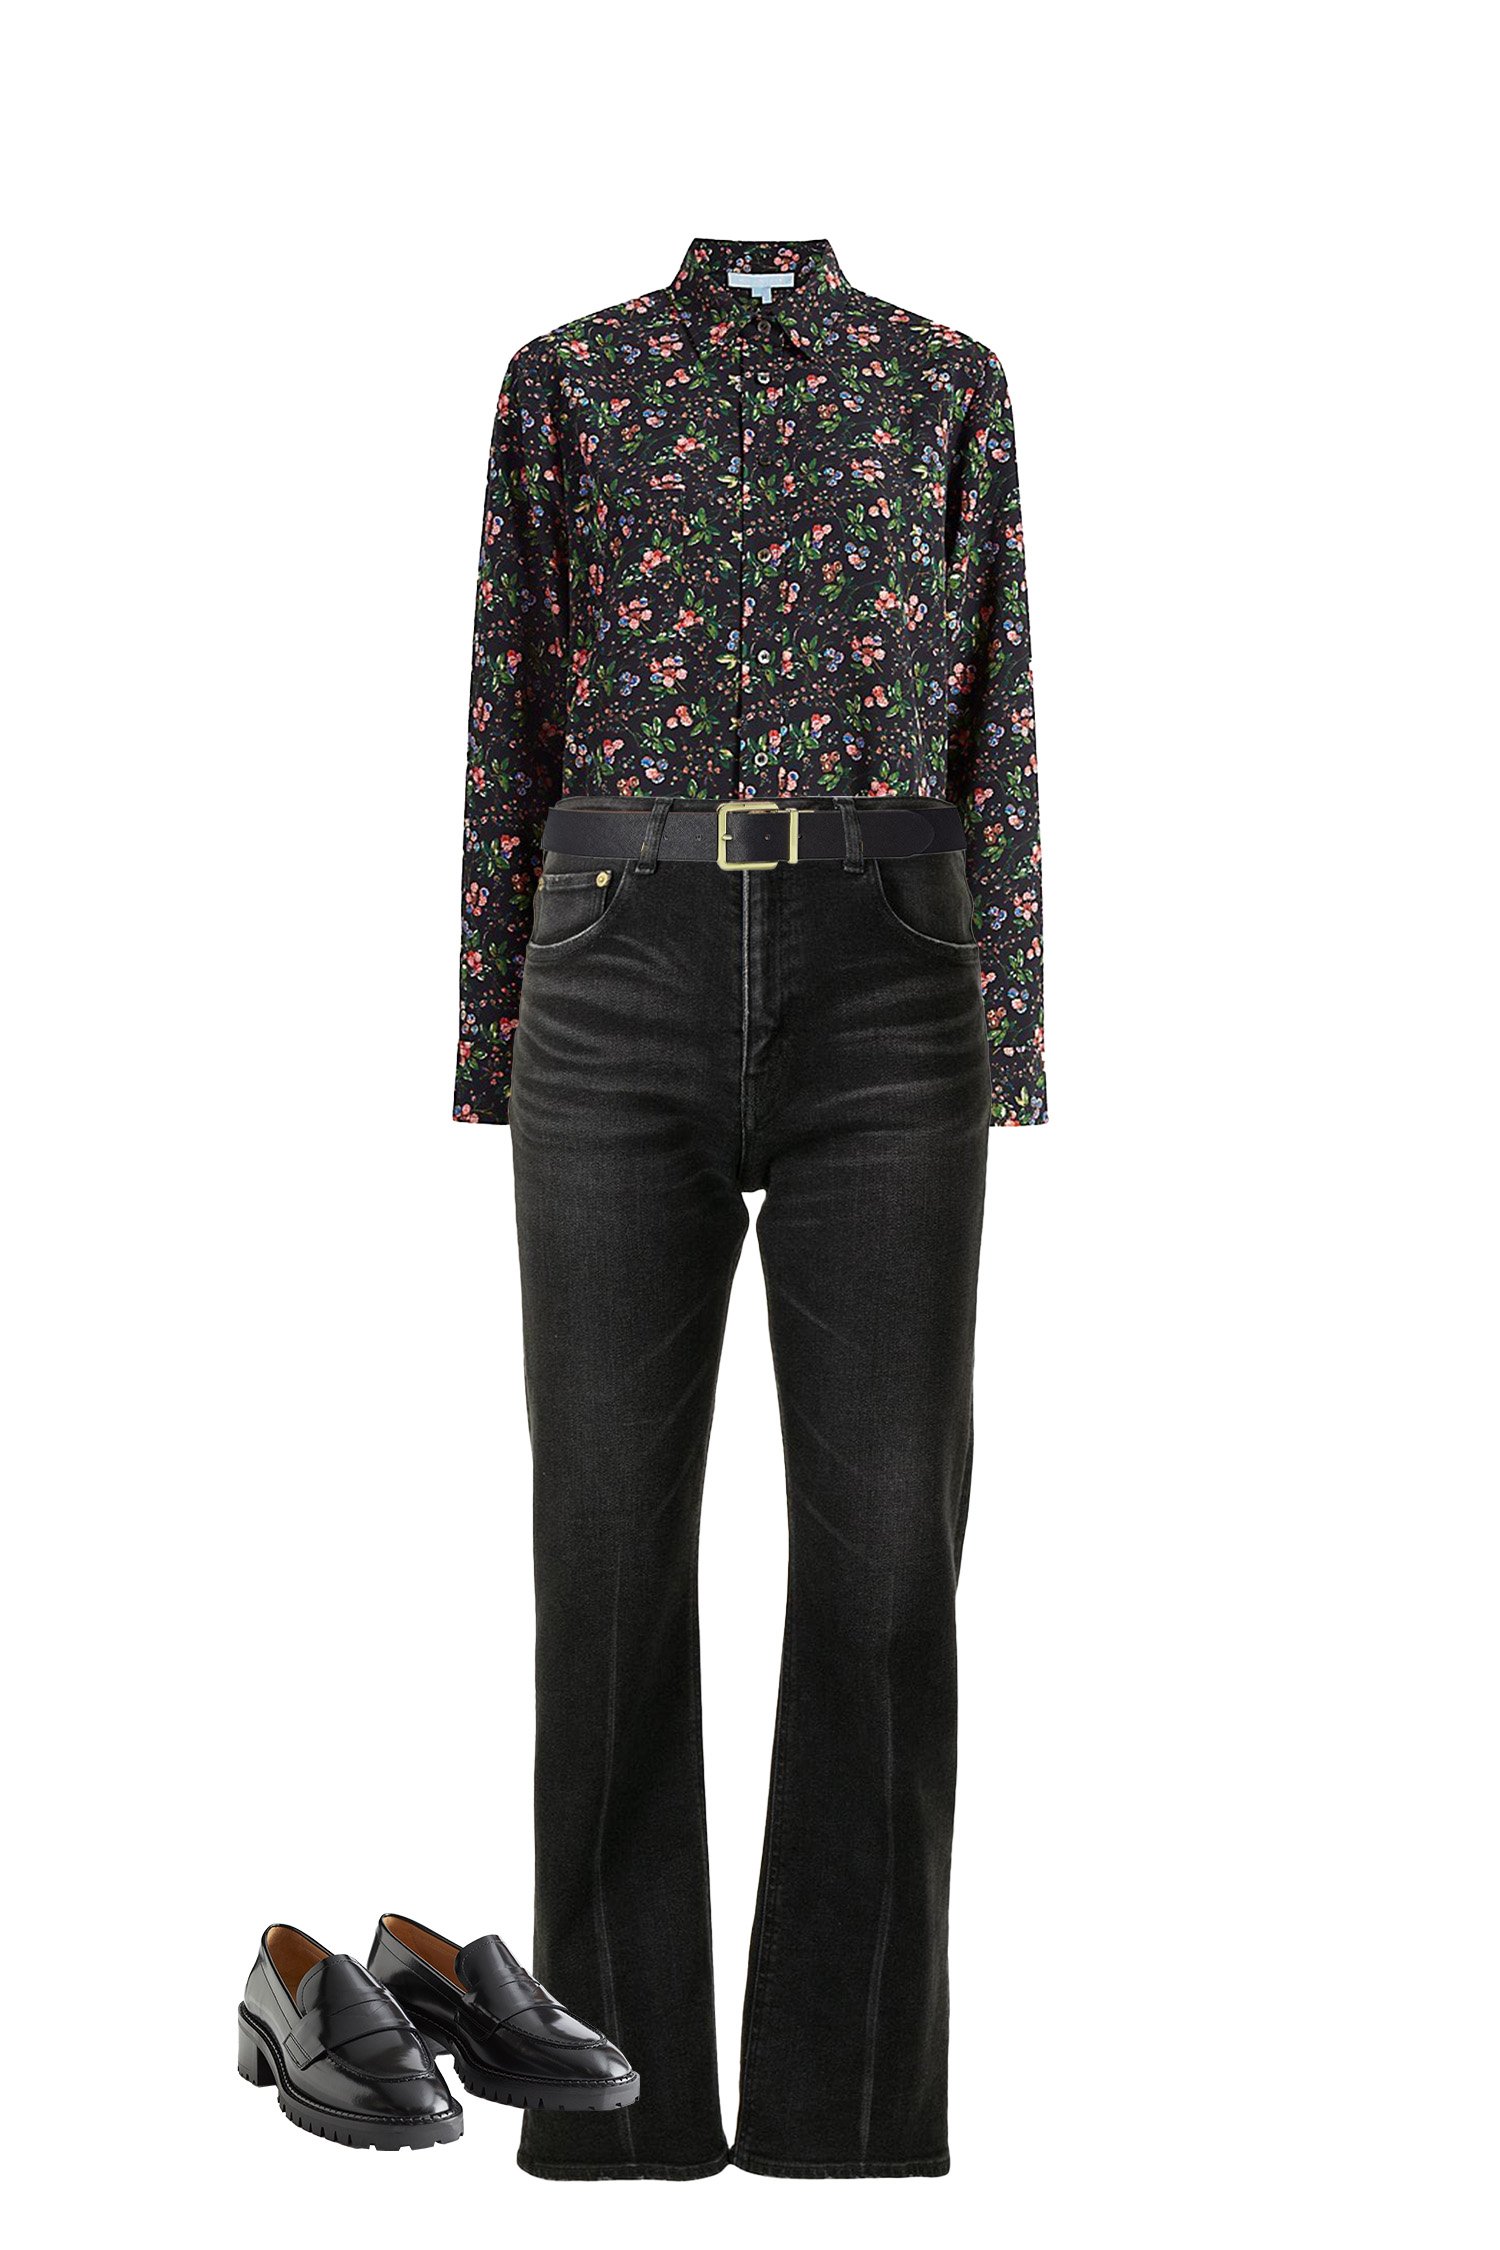 Pair Black Flare Jeans with Black Floral Shirt, and Black Loafers